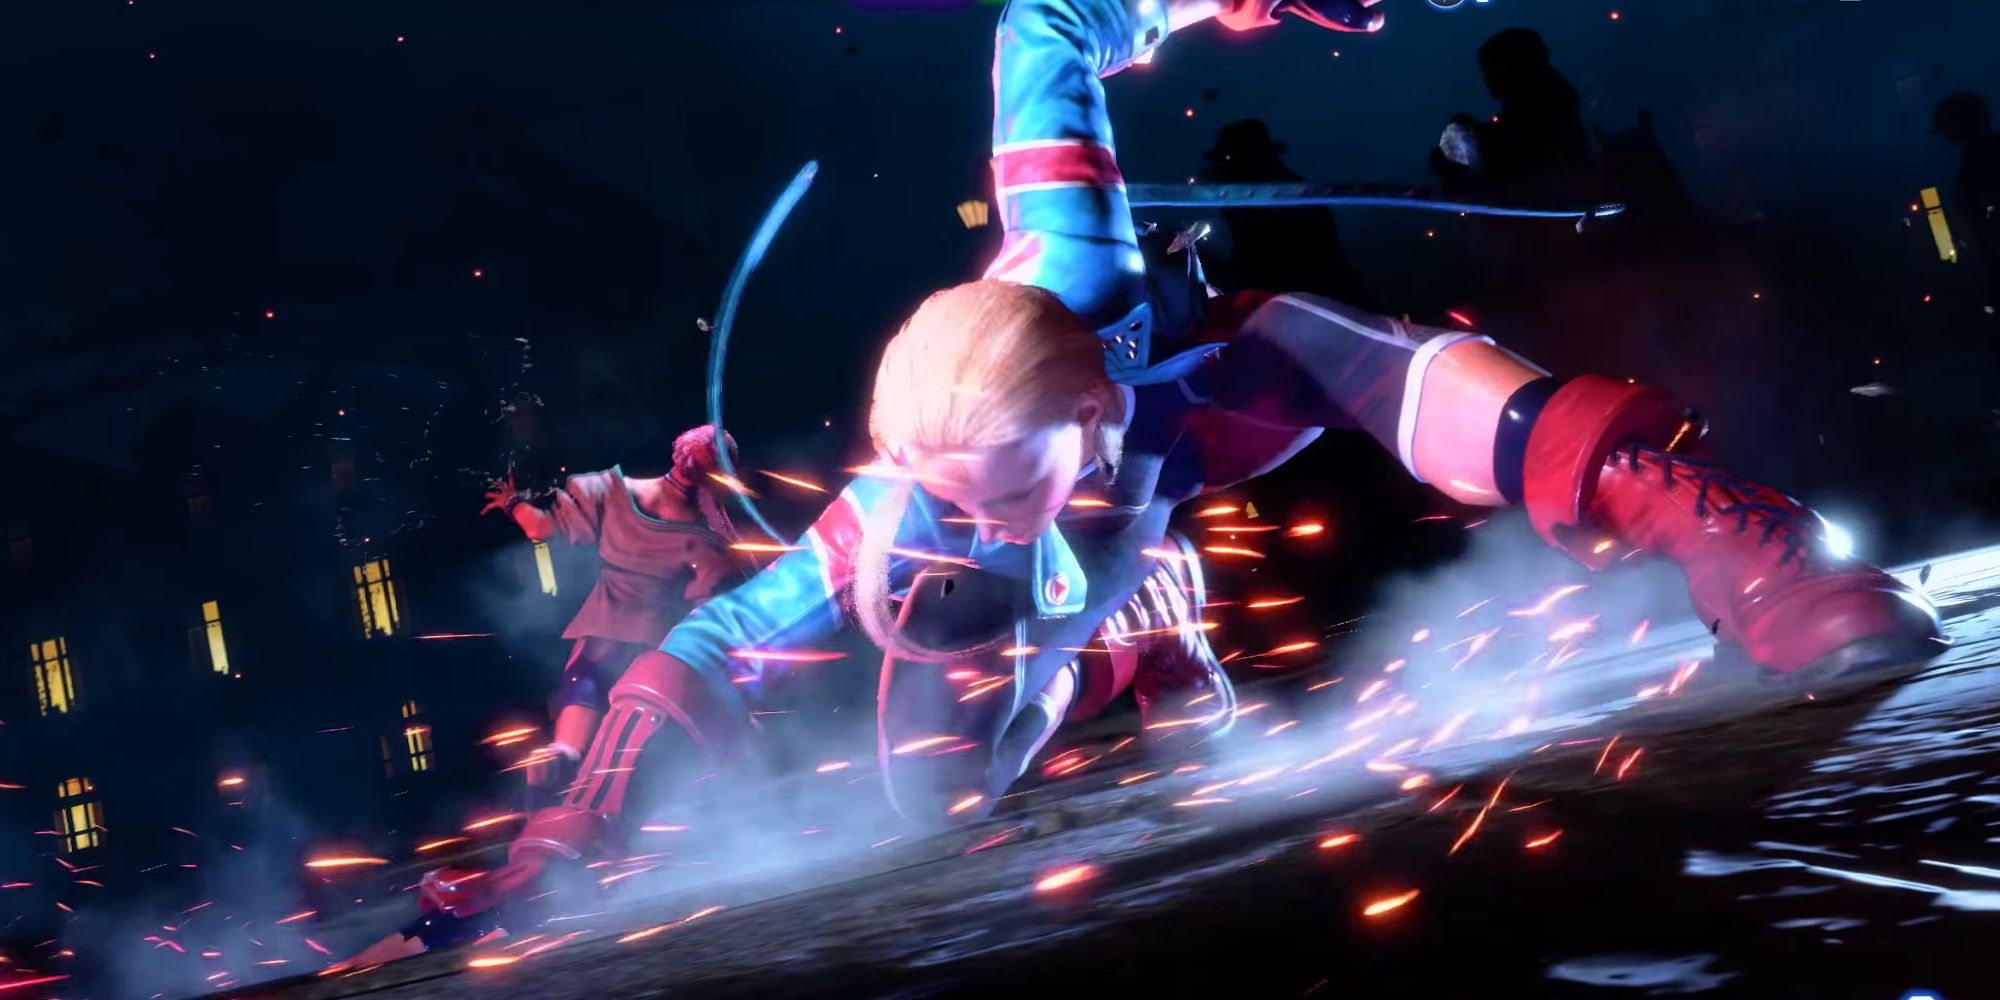 Screenshot of Street Fighter 6 showing Cammy's pose after landing a ultimate attack on Maron with smoke and sparks coming from Cammy's landing.